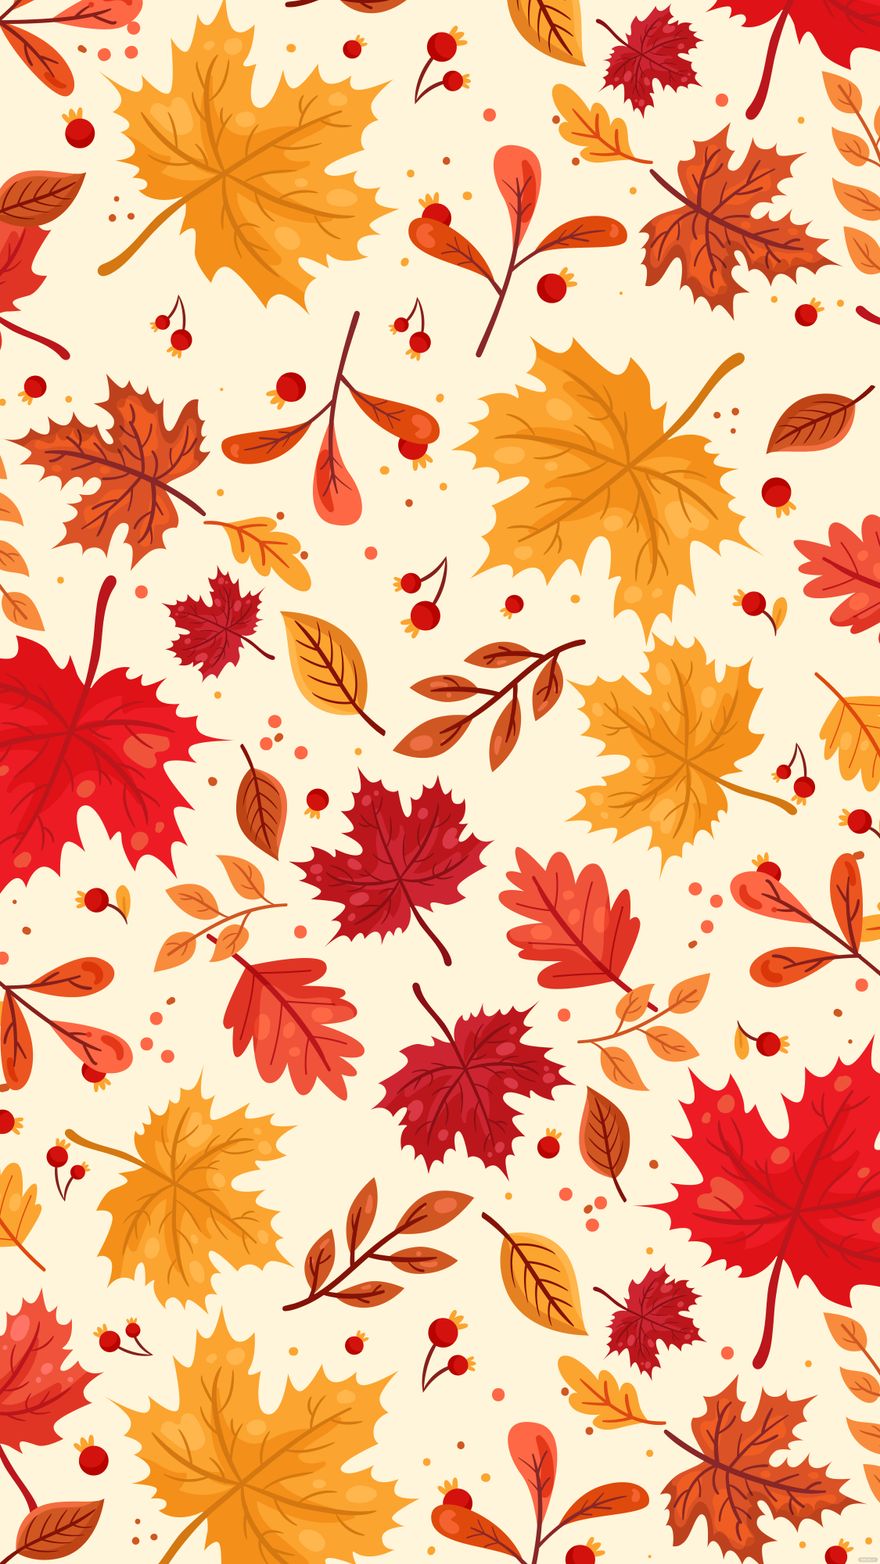 Free Fall Leaves iPhone Background in Illustrator, EPS, SVG, JPG